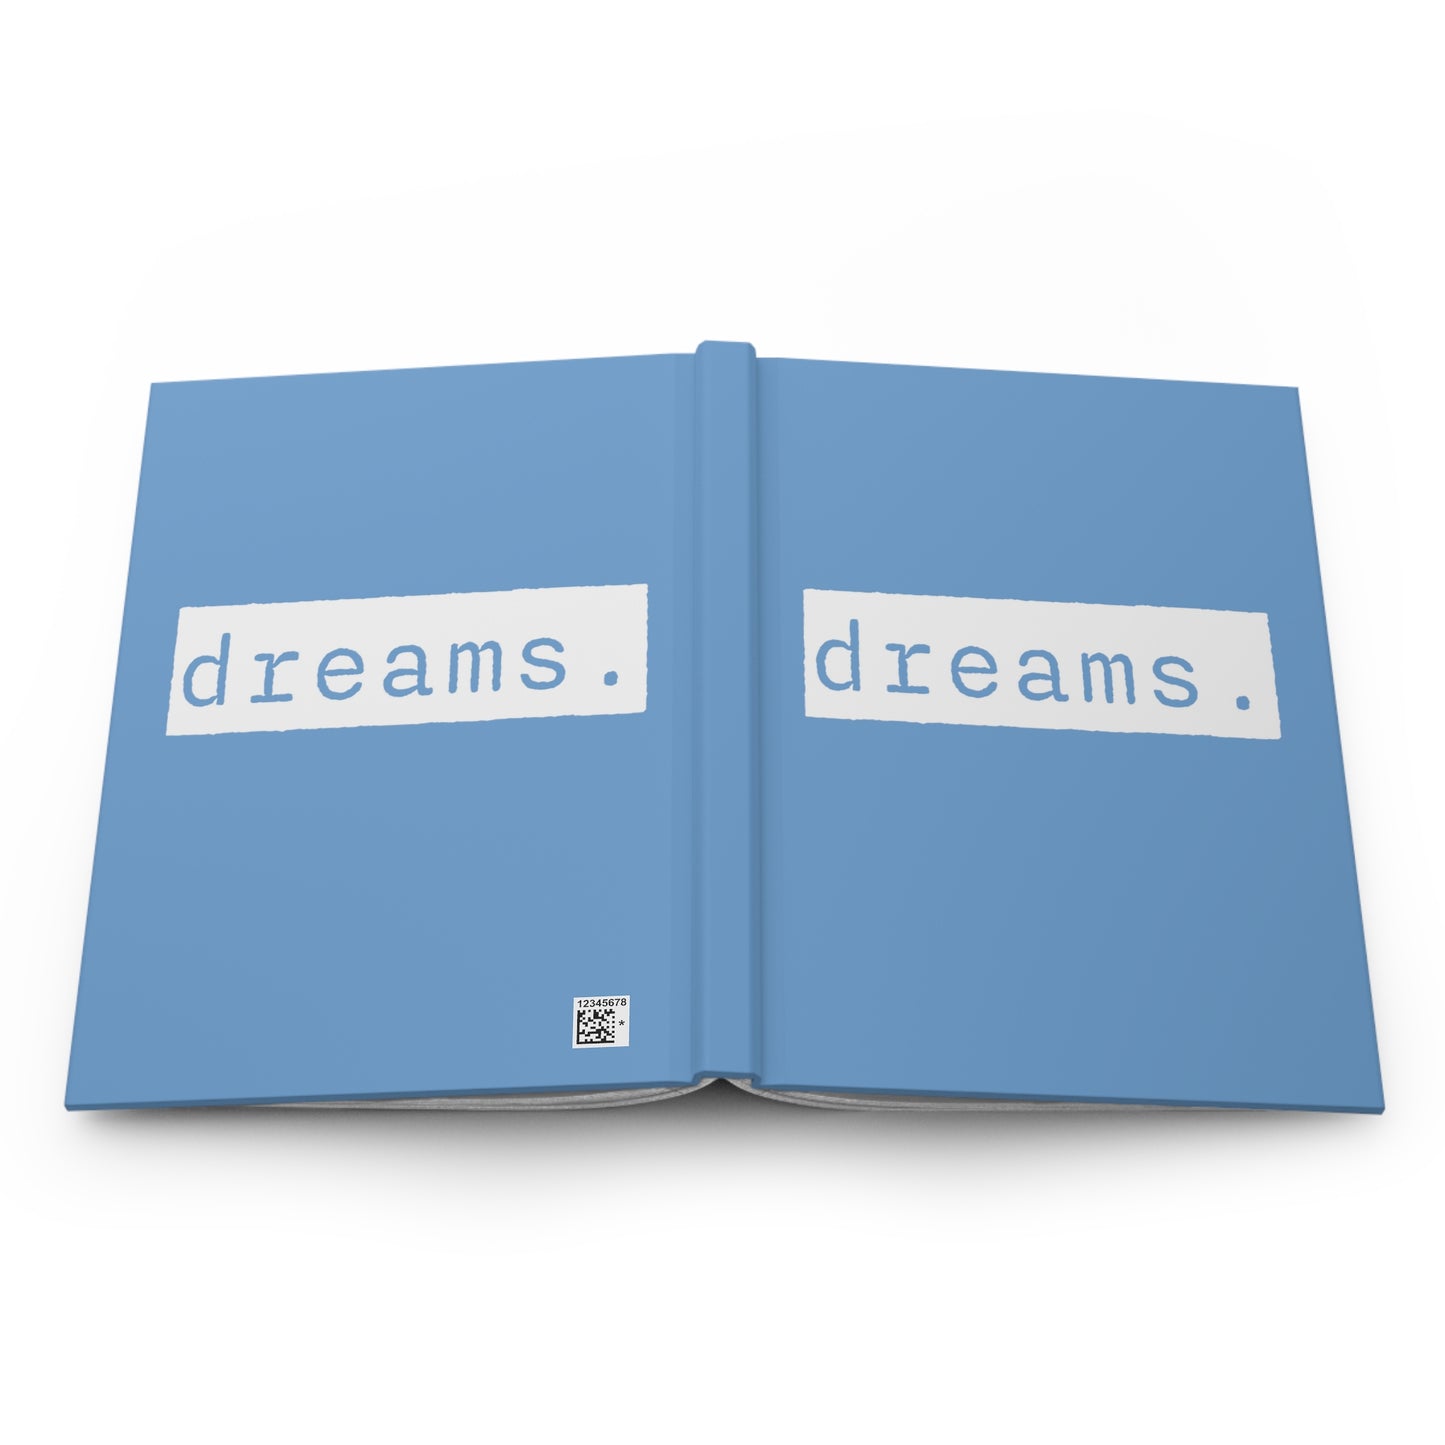 Dreams Blue Matte Hardcover Journal | Blank Book | Lined Notebook Diary Dream Log